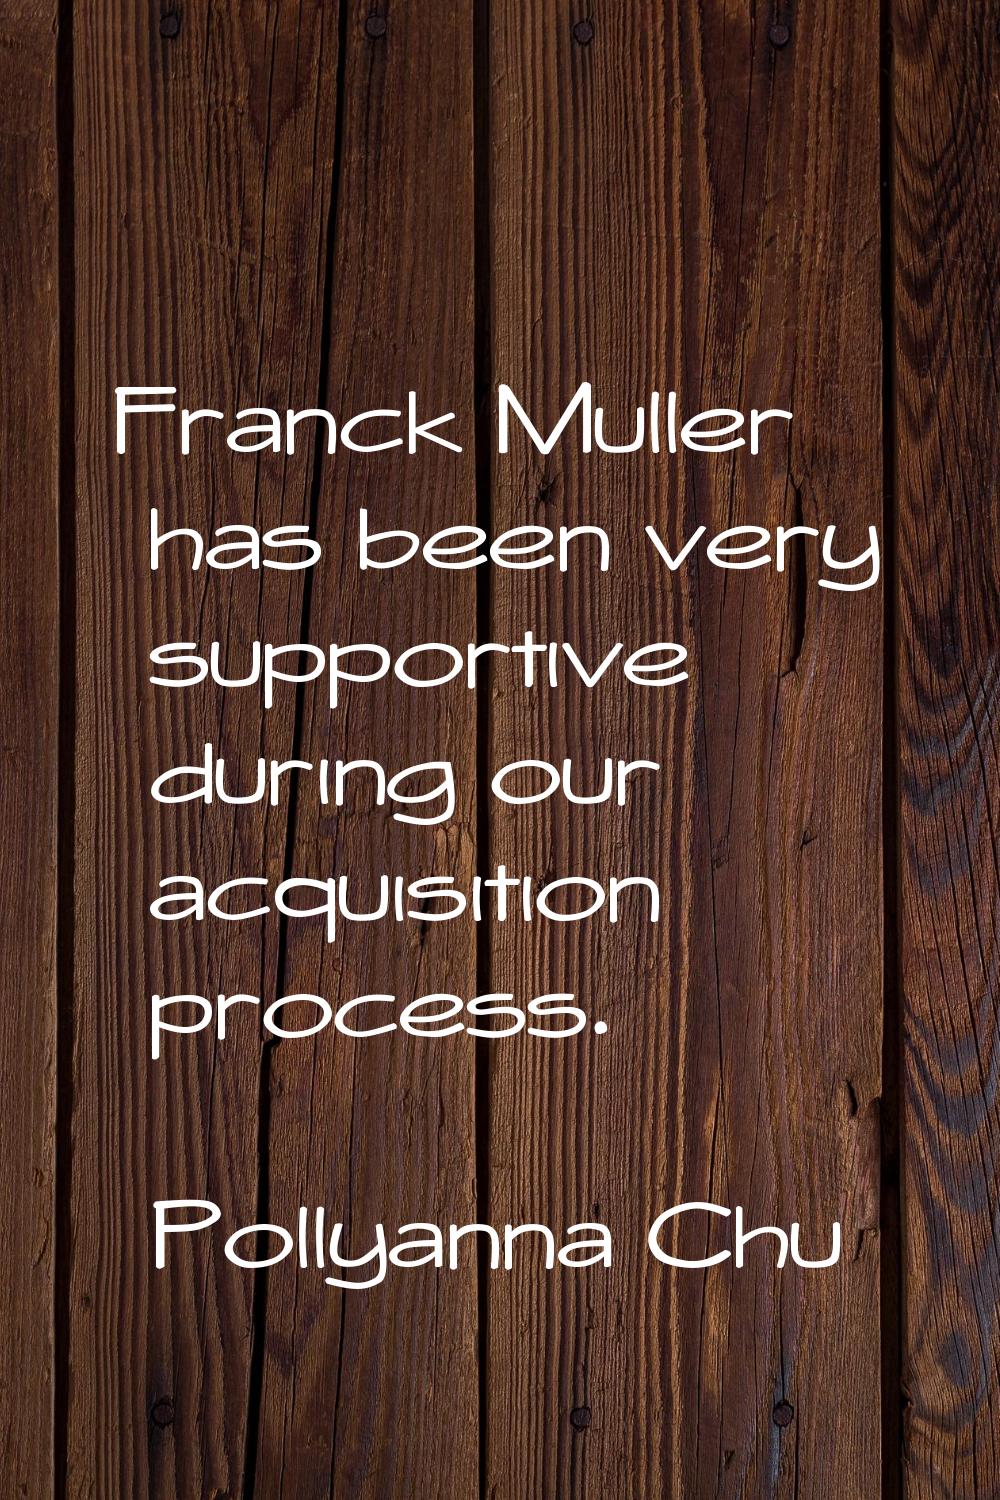 Franck Muller has been very supportive during our acquisition process.